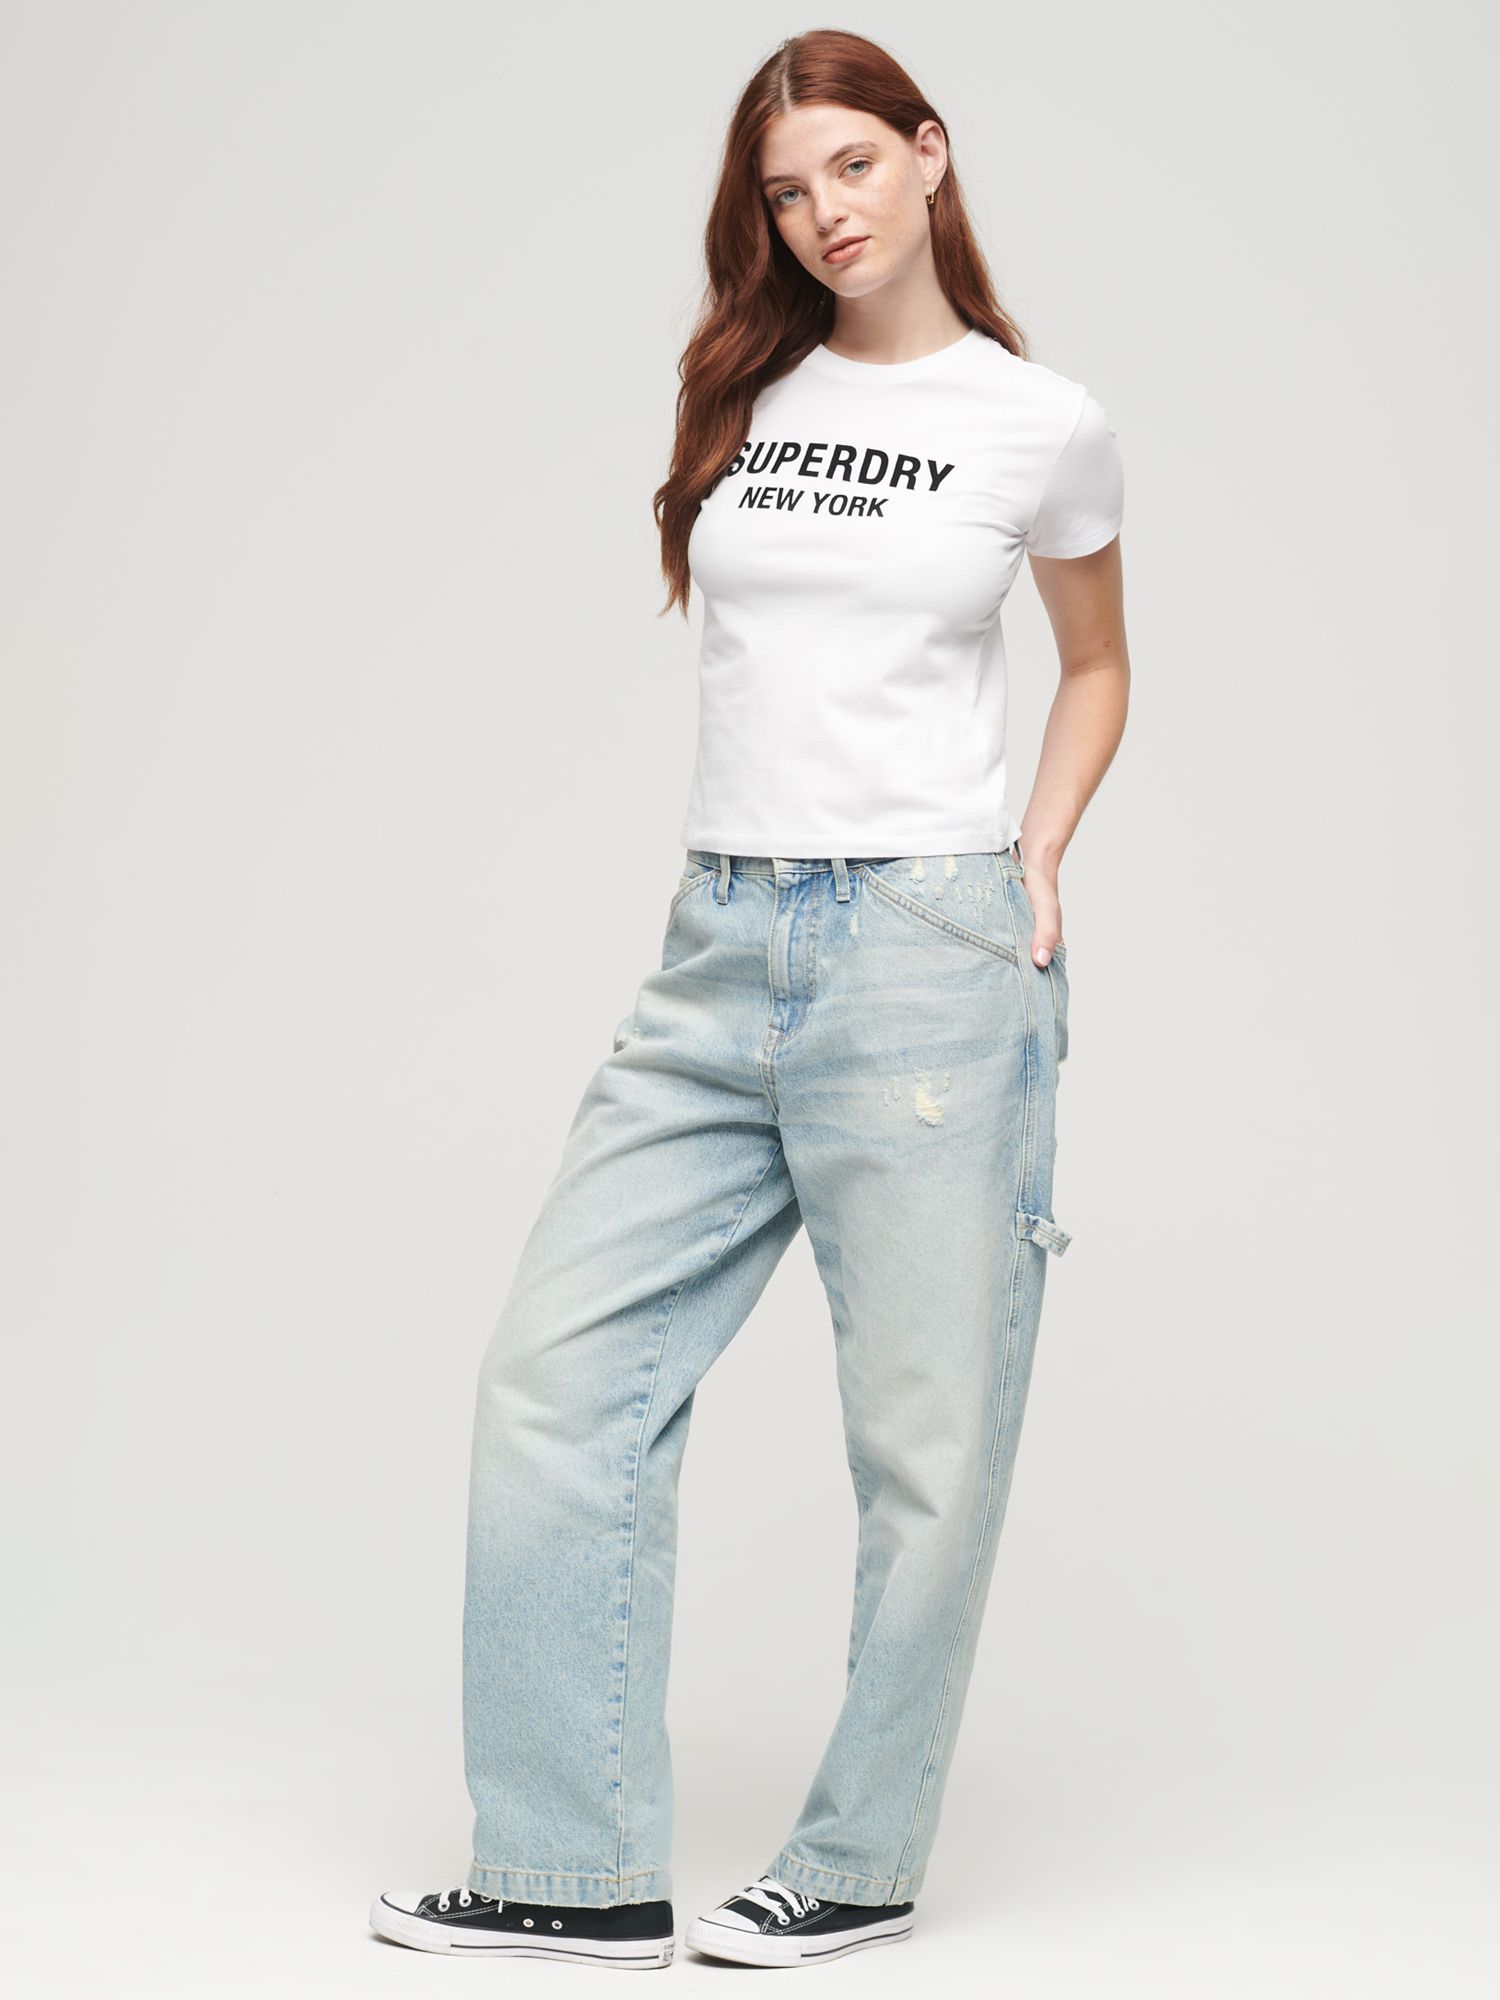 Buy Superdry Sport Luxe Logo Fitted Cropped T-Shirt, White/Black Online at johnlewis.com